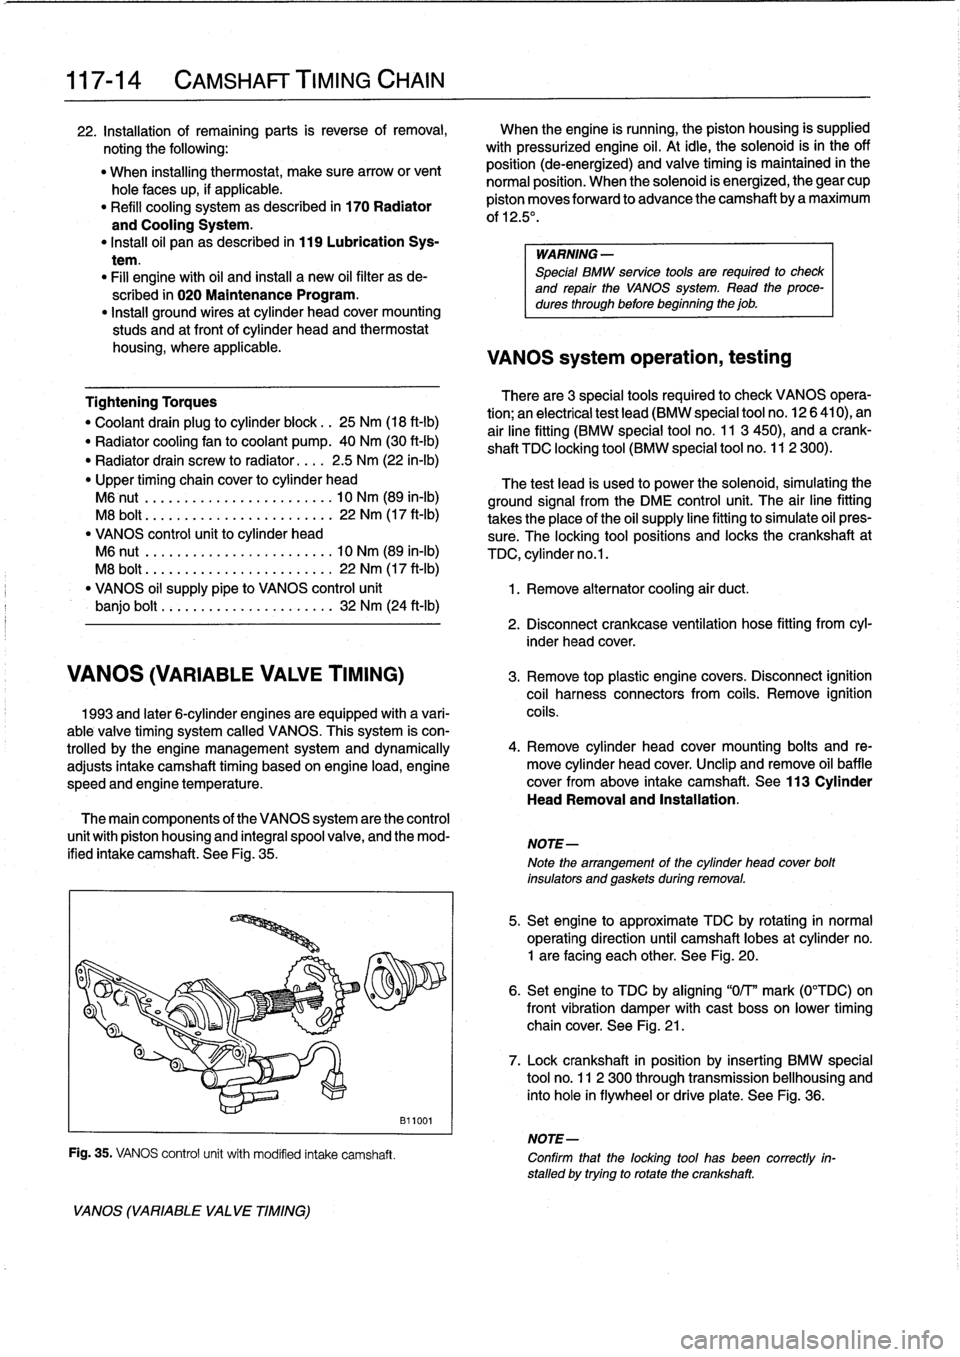 BMW 318i 1997 E36 Owners Guide 
117-
1
4

	

CAMSHAFT
TIMING
CHAIN

22
.
Installation
of
remaining
parts
is
reverse
of
removal,

	

When
theengine
is
running,
the
piston
housing
is
supplied

noting
the
following
:

	

with
pressuri